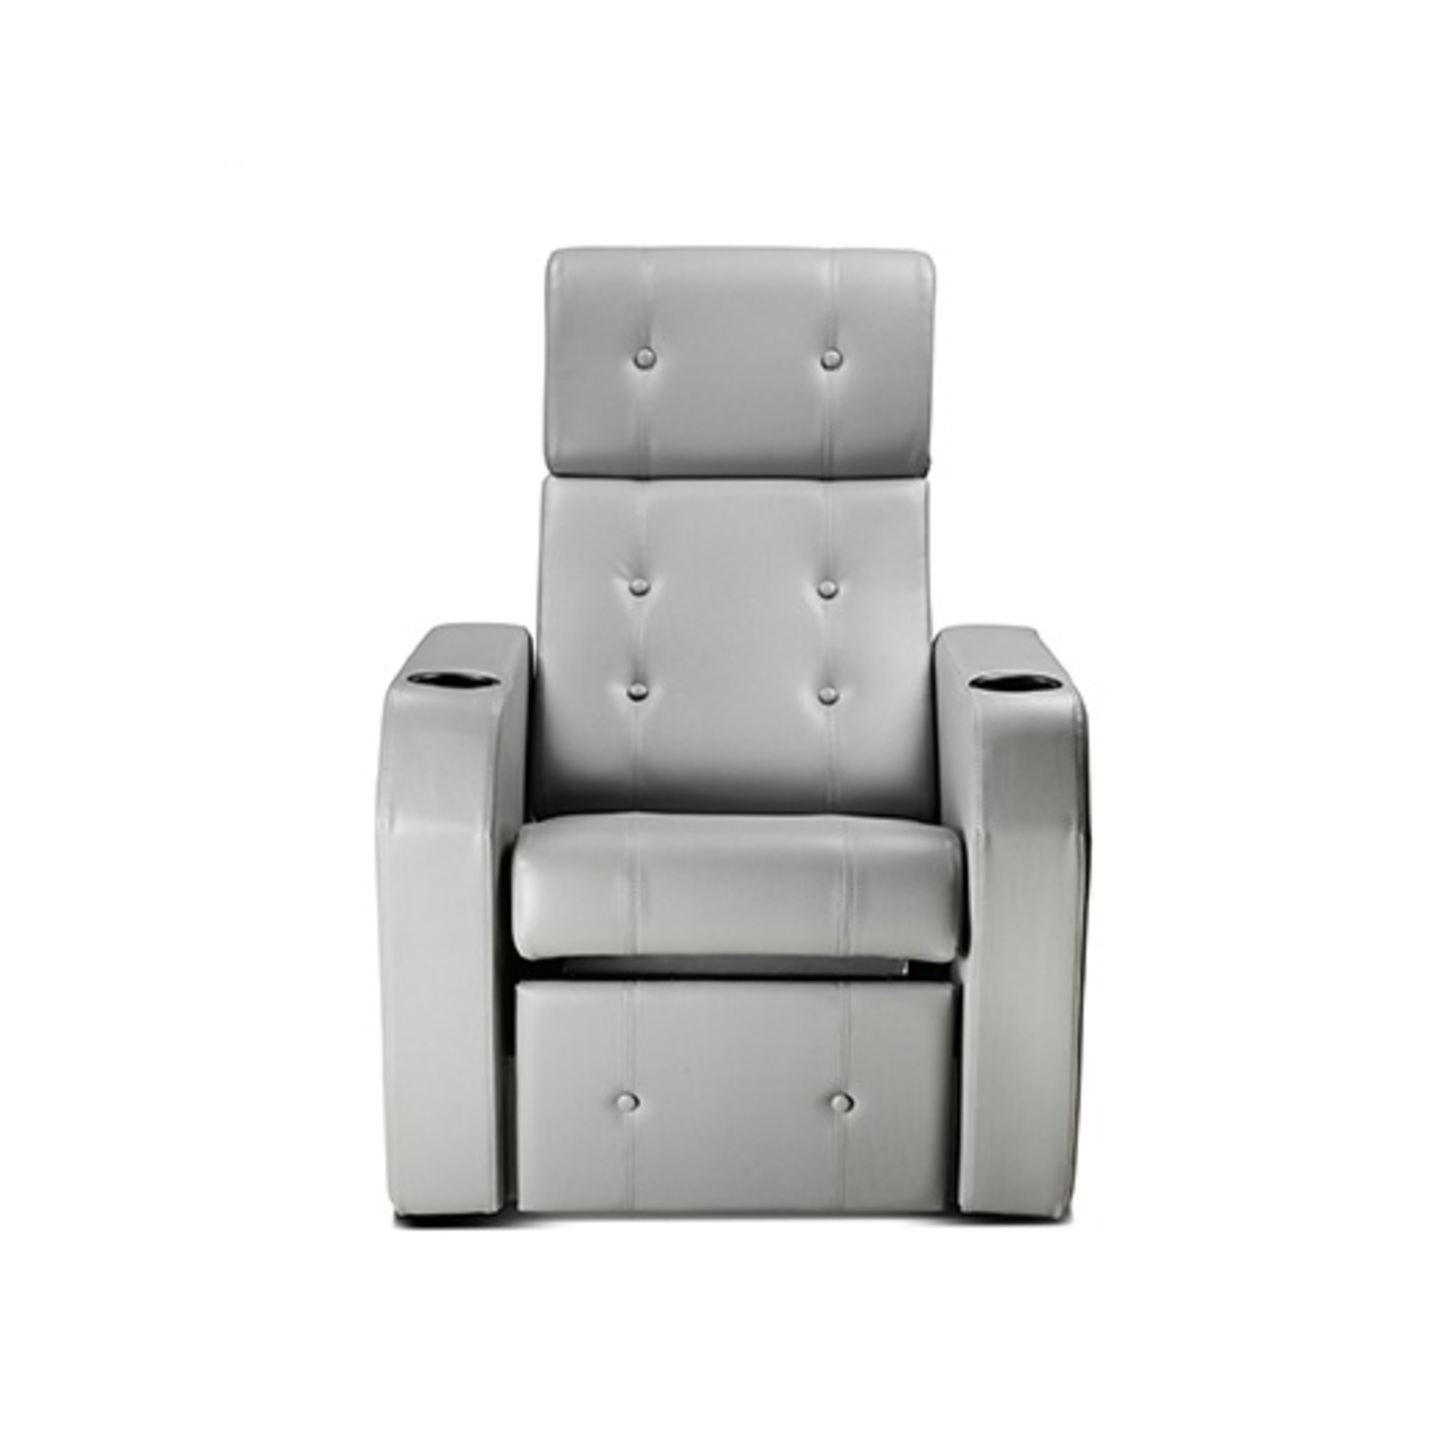 LN Recliner Chair Phoenix Manual System In Sliver Colour